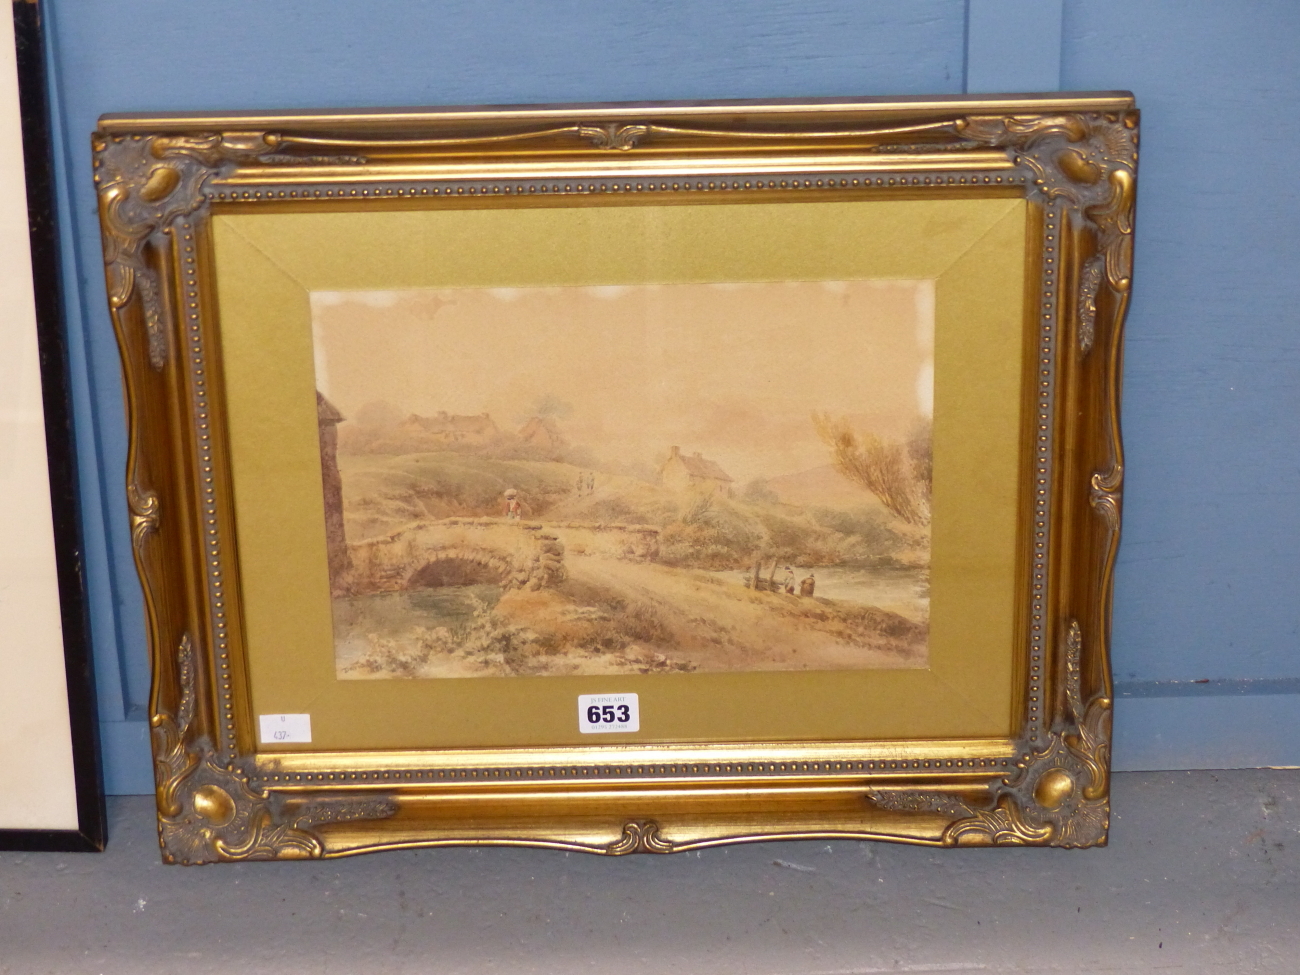 MANNER OF DAVID COX, FIGURES IN A RURAL SCENE BY A BRIDGE OVER A RIVER, BEARS SIGNATURE AND DATE - Image 3 of 5